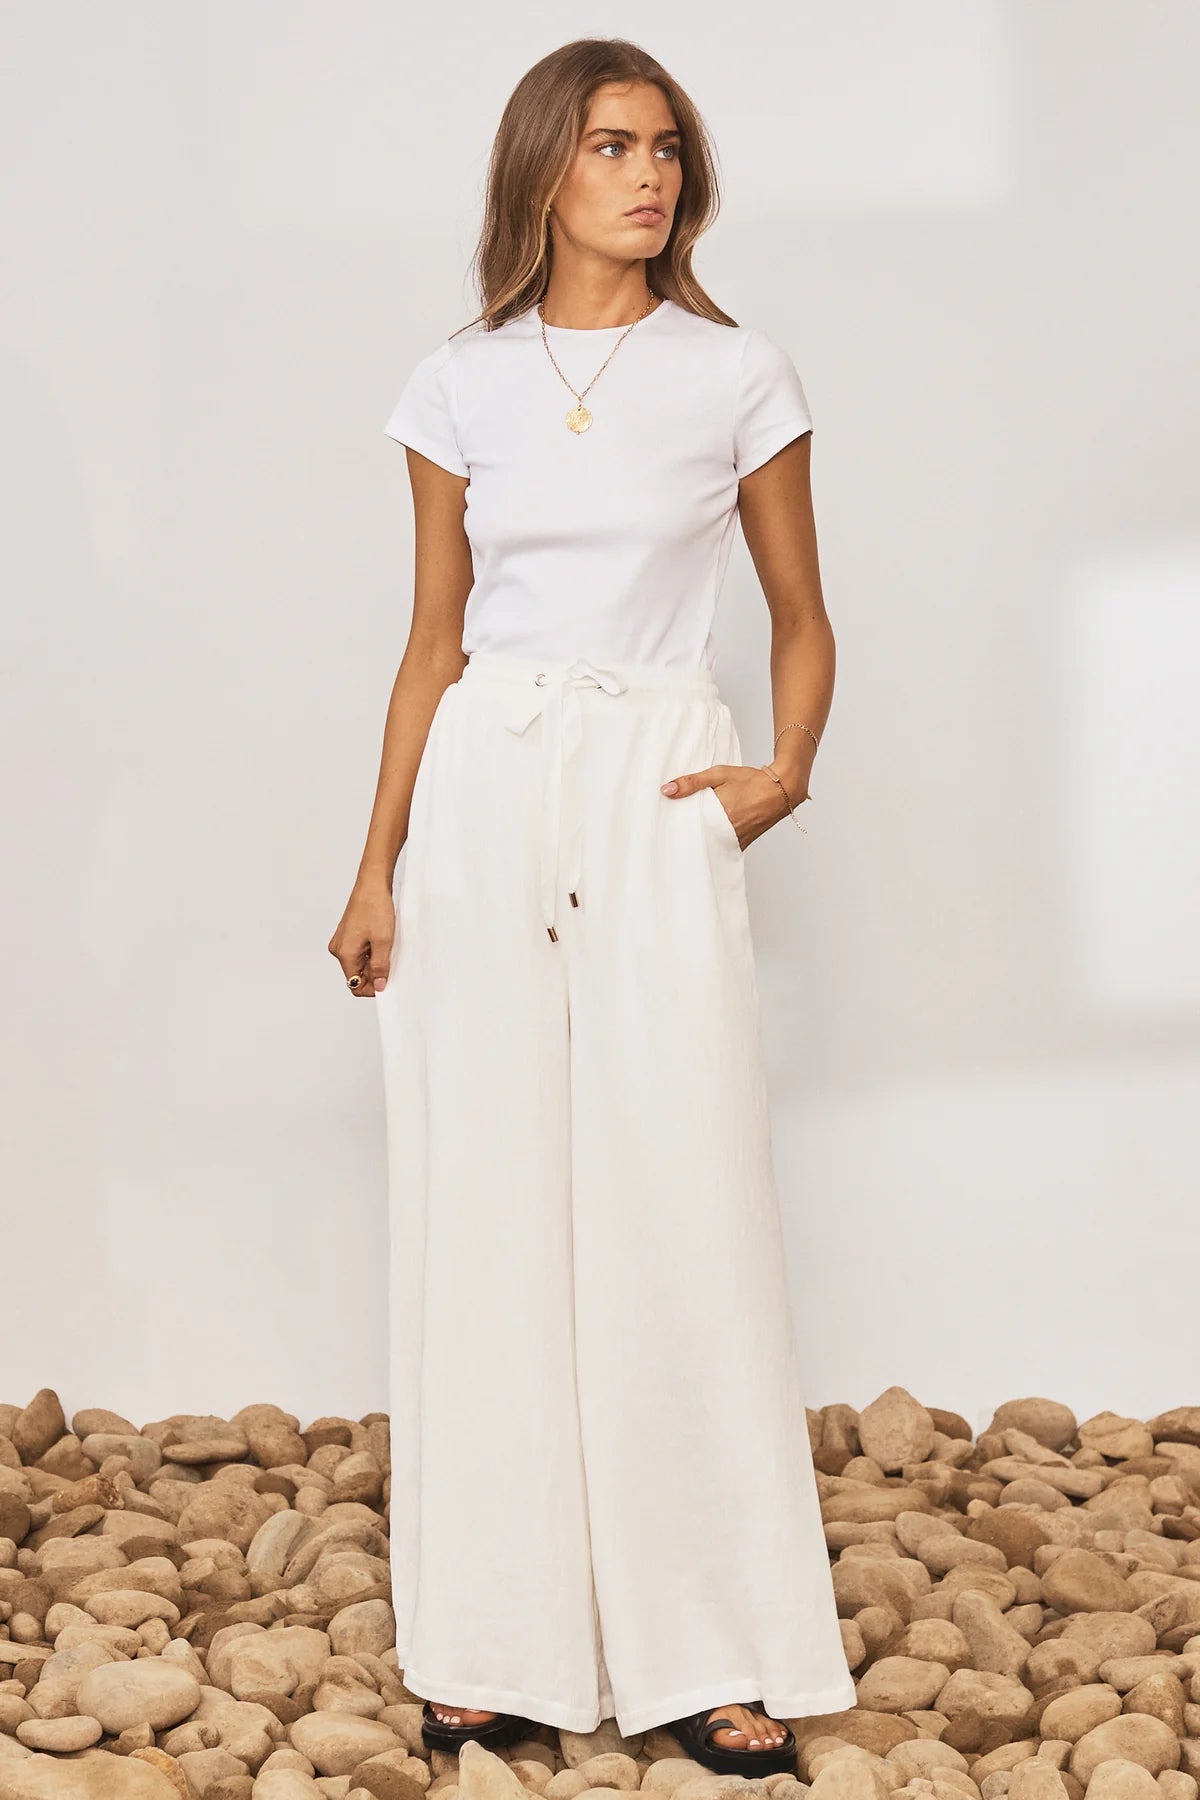 White wide leg trousers with elasticated waistband and drawstring with crinkle fabric